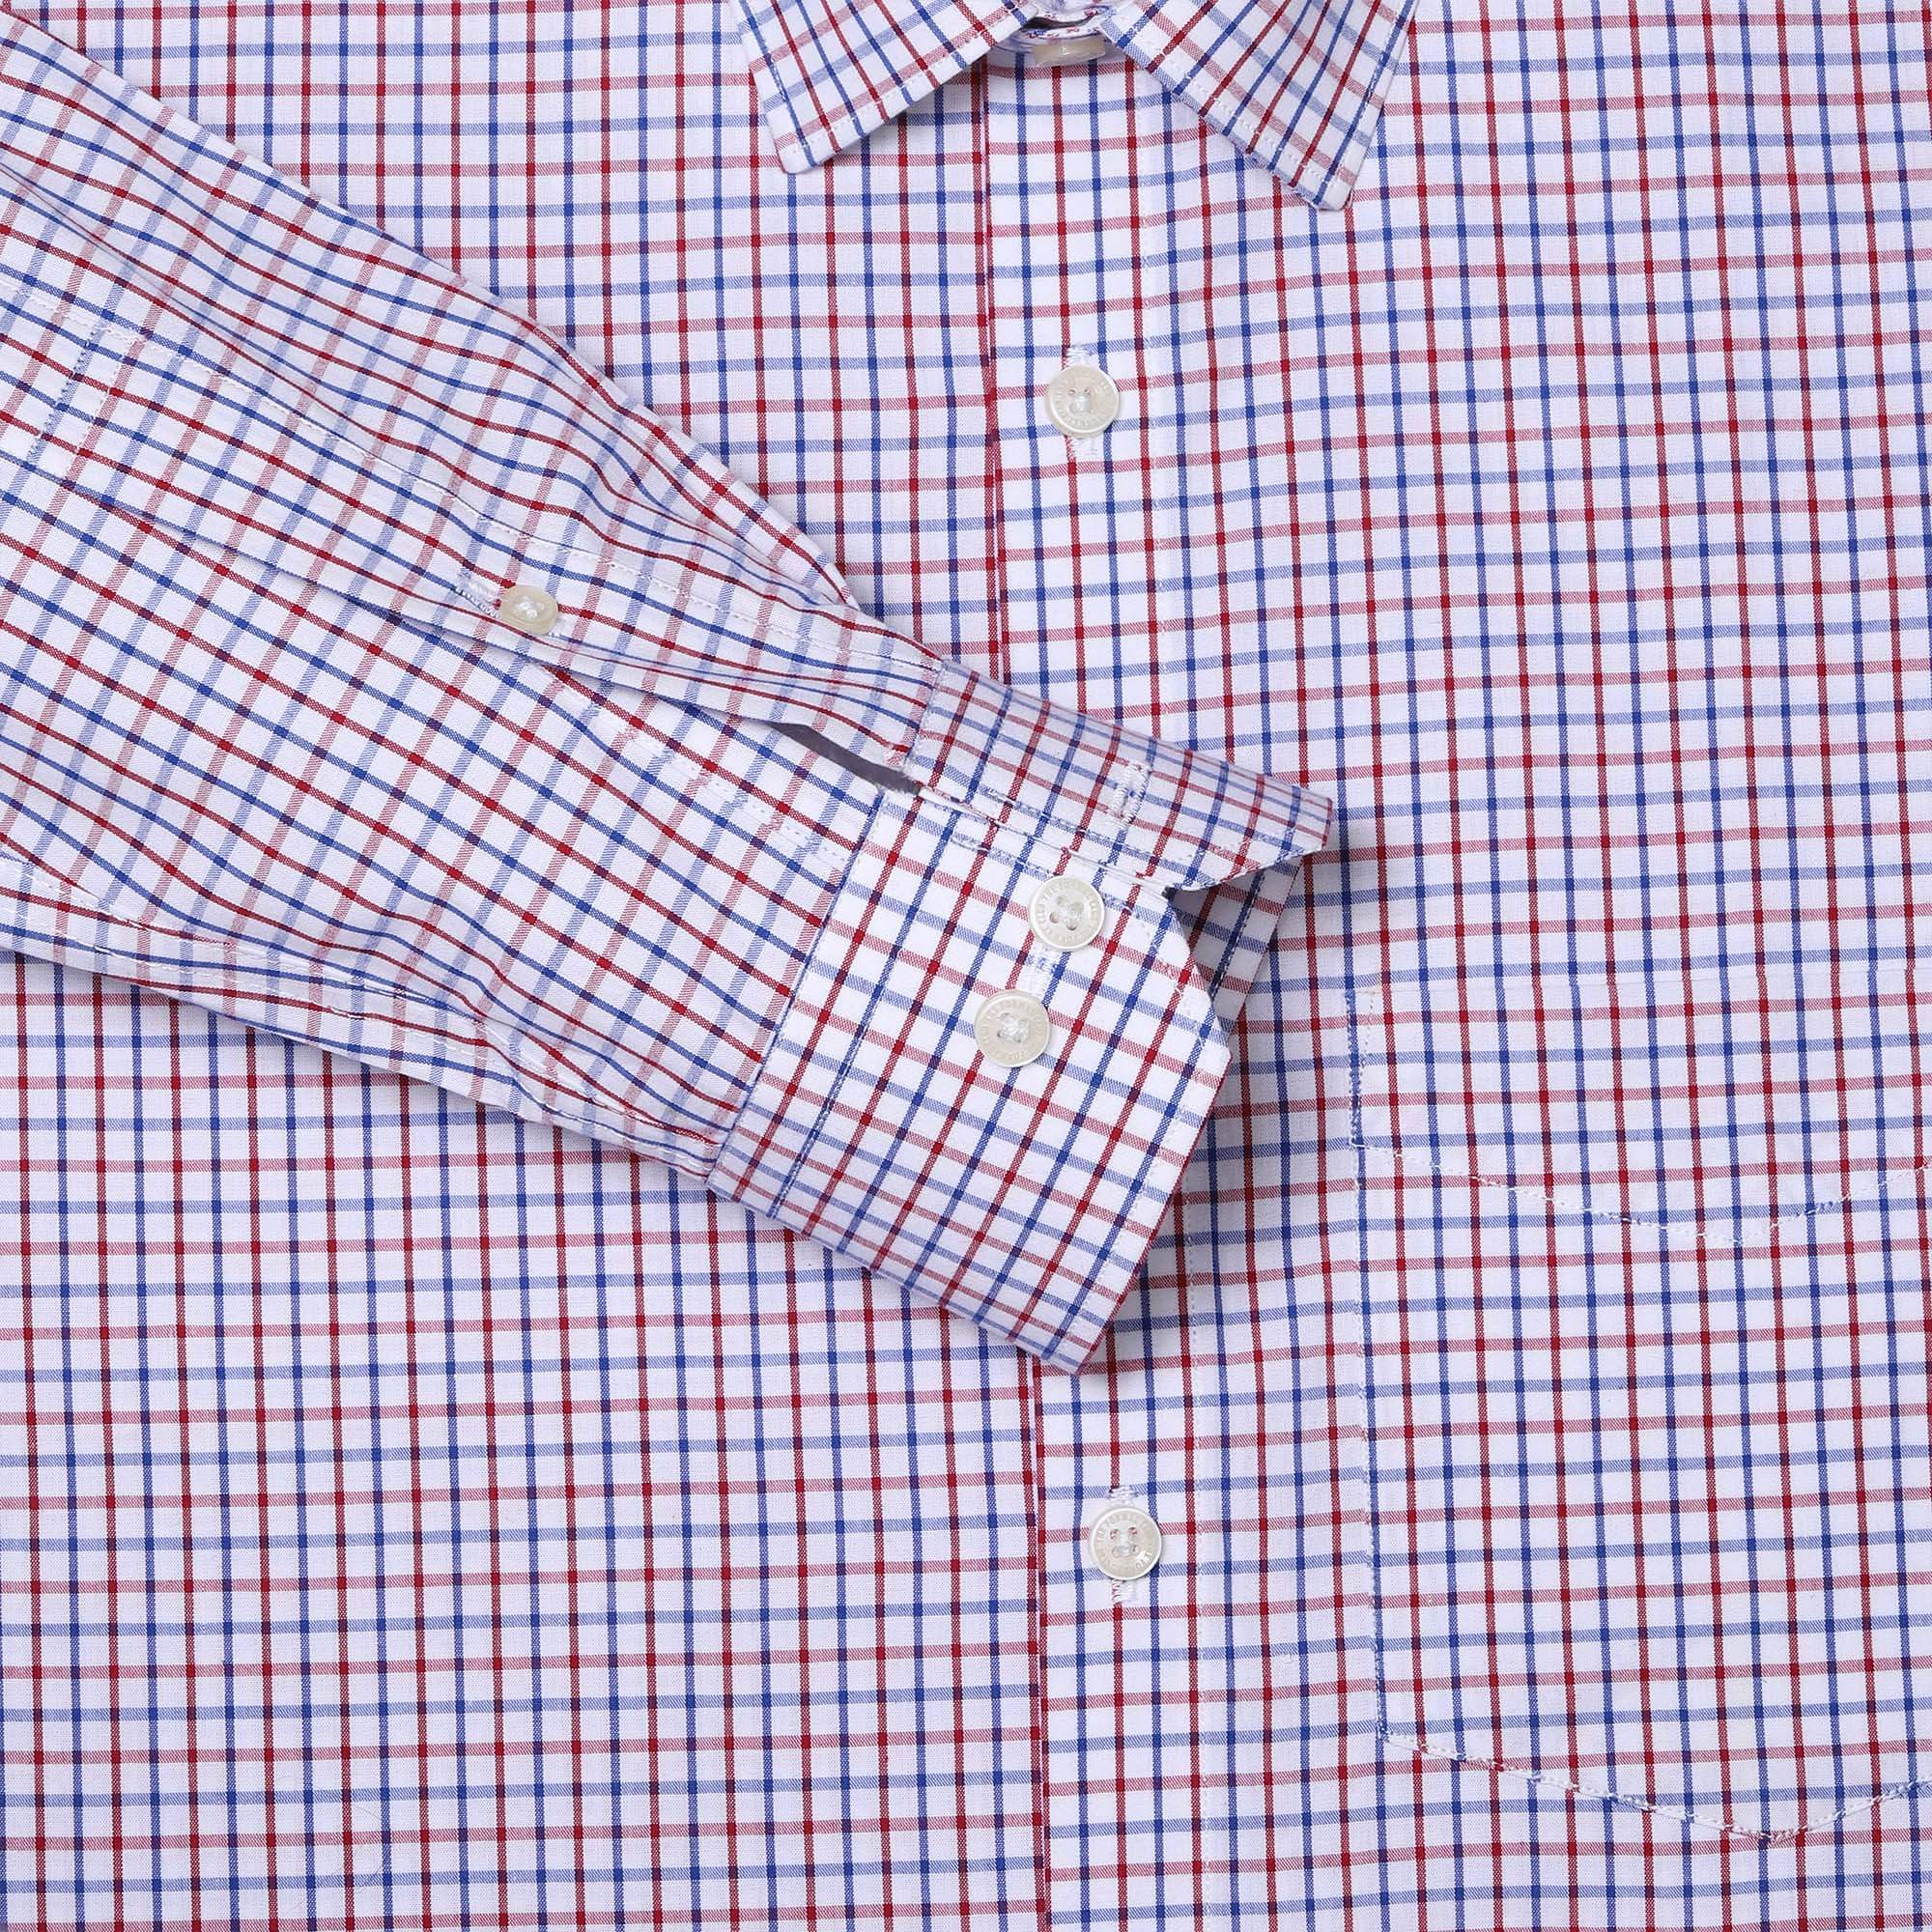 Zephyr Check Shirt In Red Blue - The Formal Club